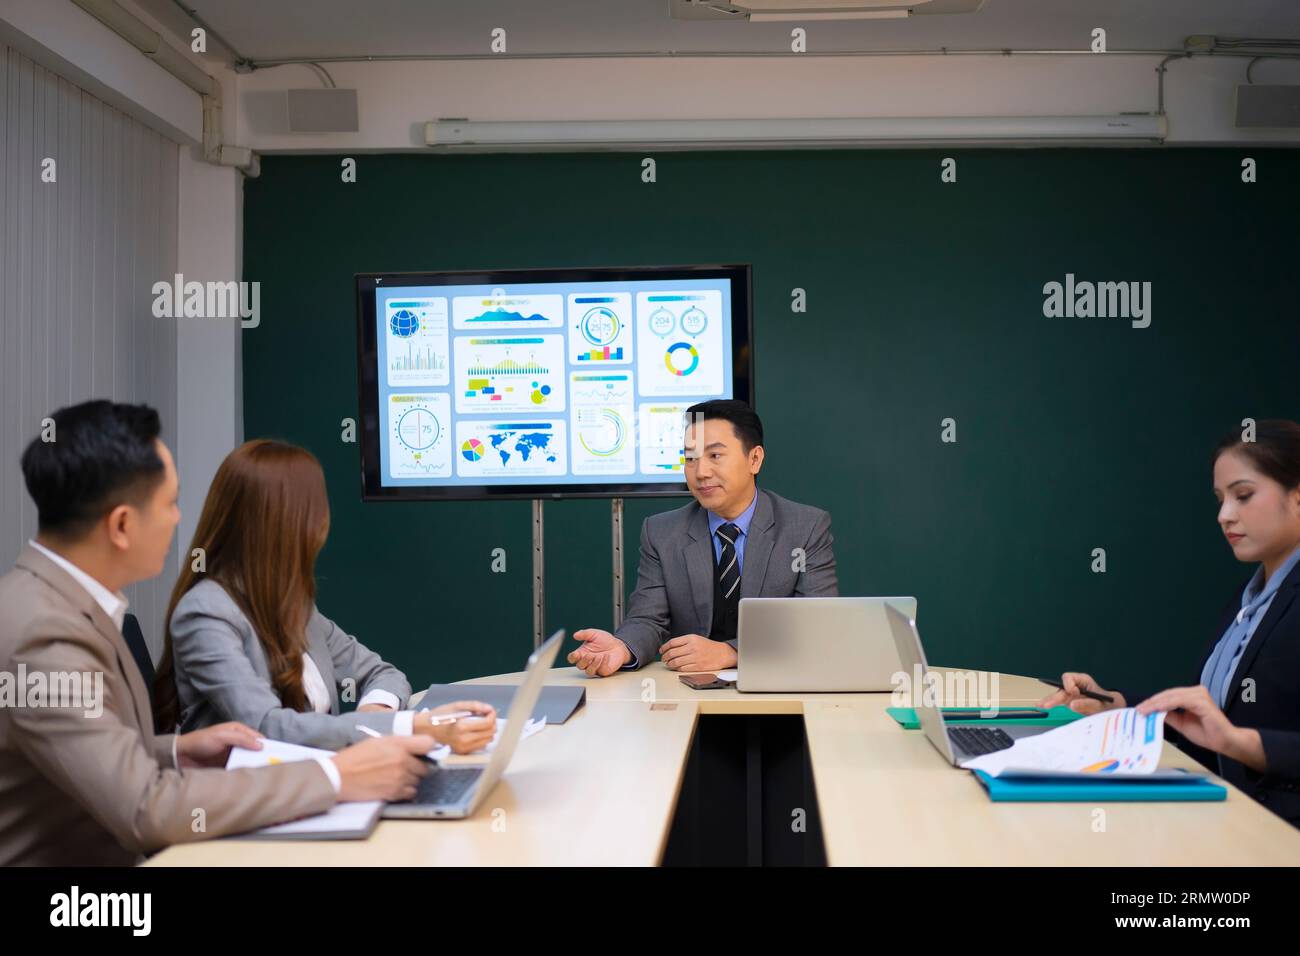 Employees are meeting at office. White collar worker concept. Stock Photo